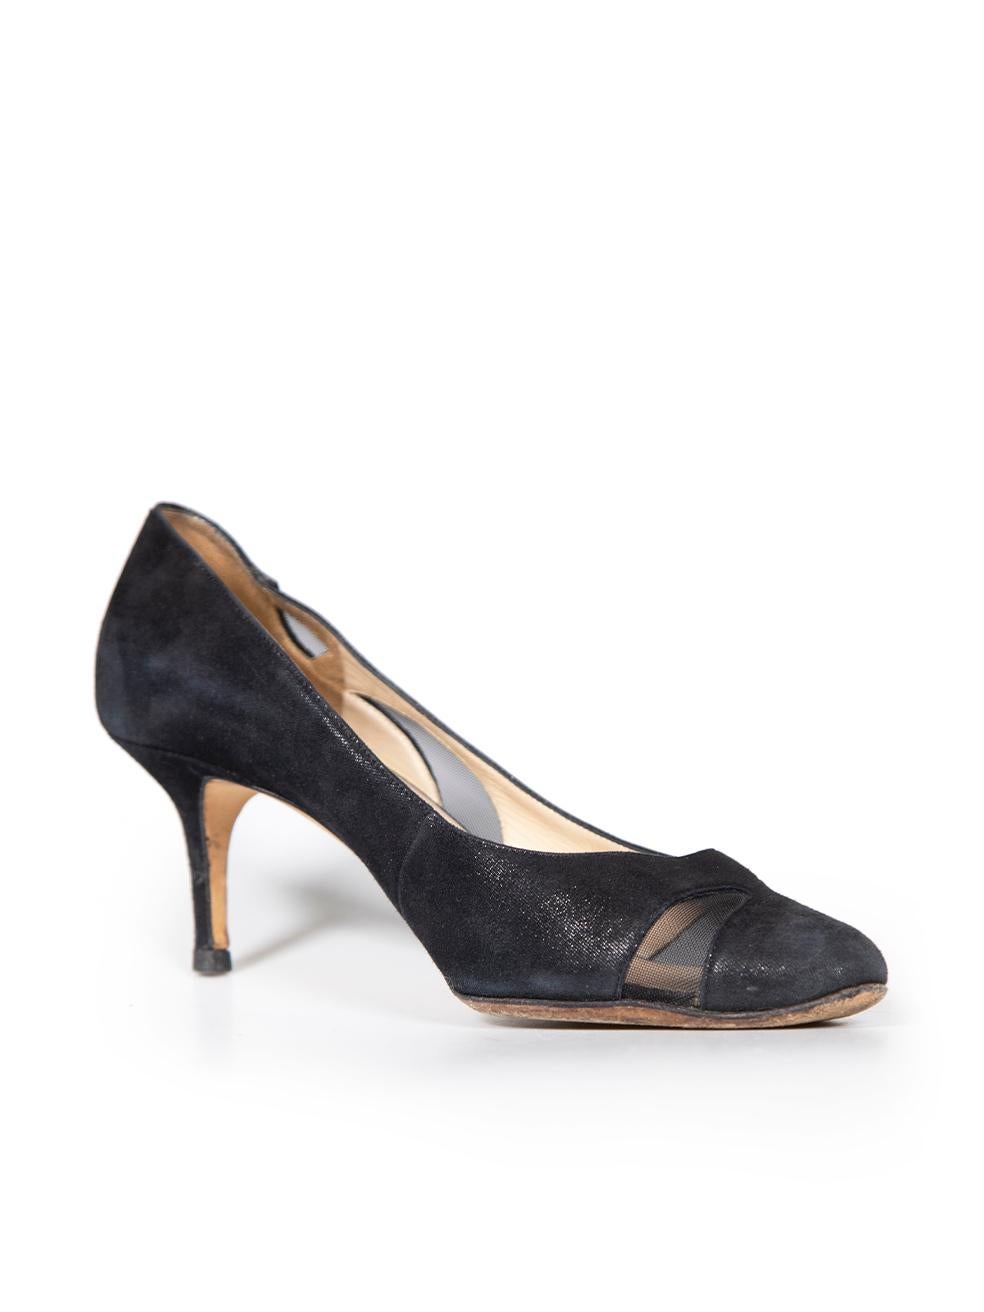 CONDITION is Good. Minor wear to pumps is evident. Light wear to heel on both shoes where indents and scuffs is seen. Minimal scratches and abrasion to top of both shoes on this used Jimmy Choo designer resale item.
 
 
 
 Details
 
 
 Black
 
